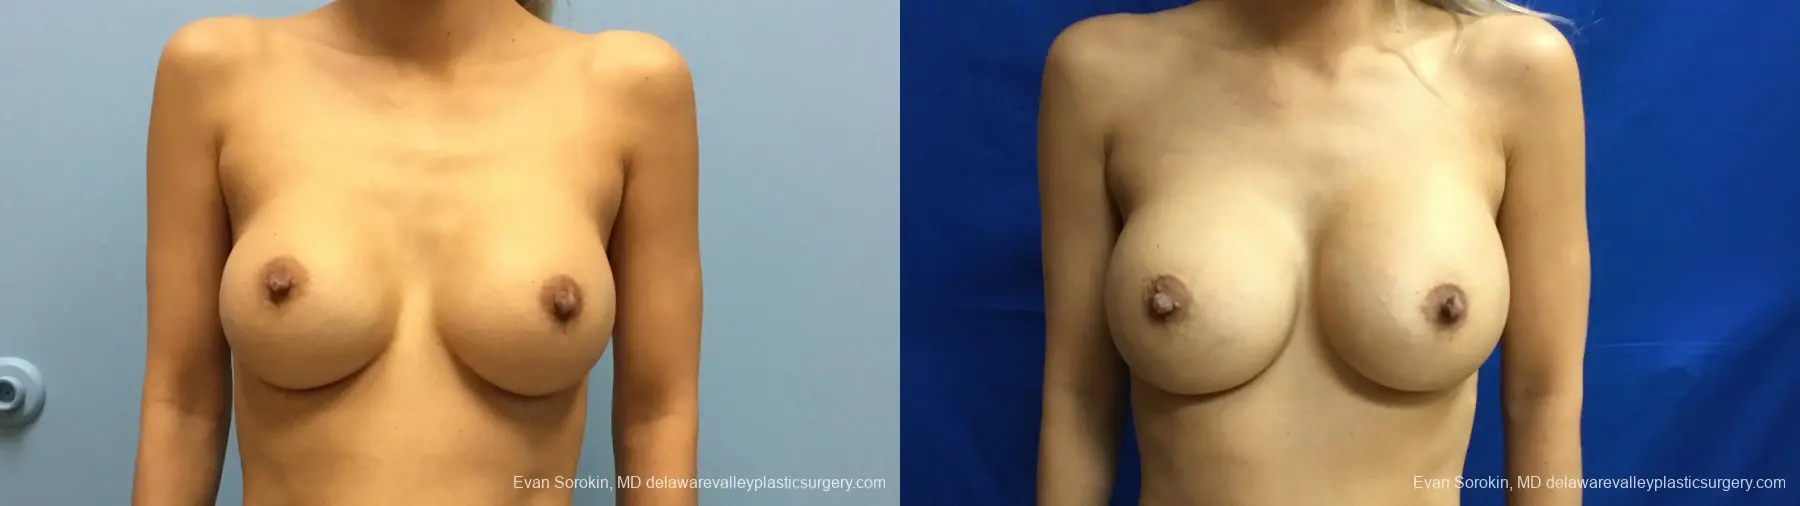 Philadelphia Breast Augmentation 13178 - Before and After 1